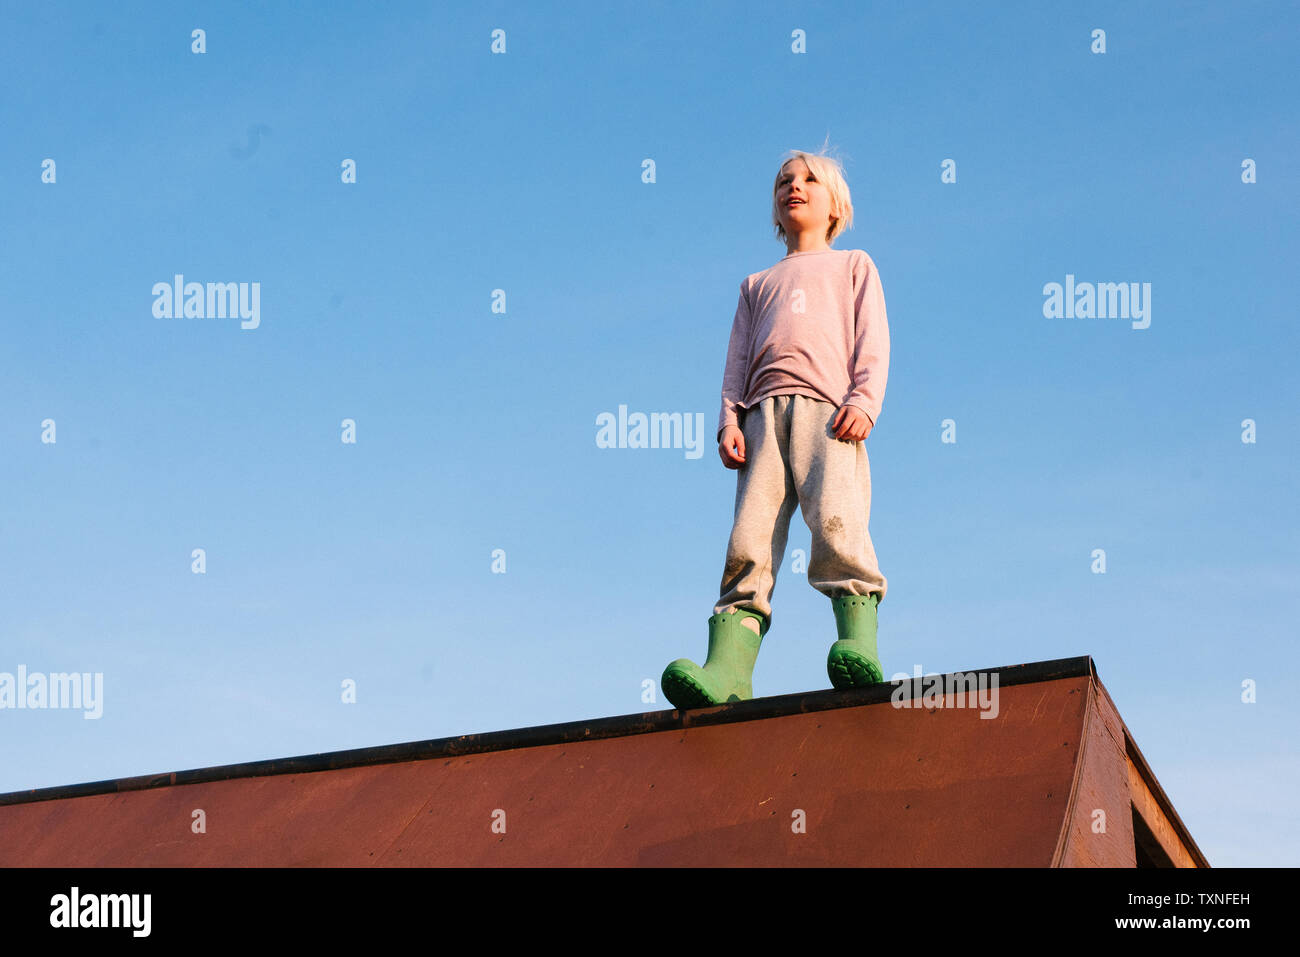 Boy standing on top of skateboard ramp against blue sky, low angle view Stock Photo